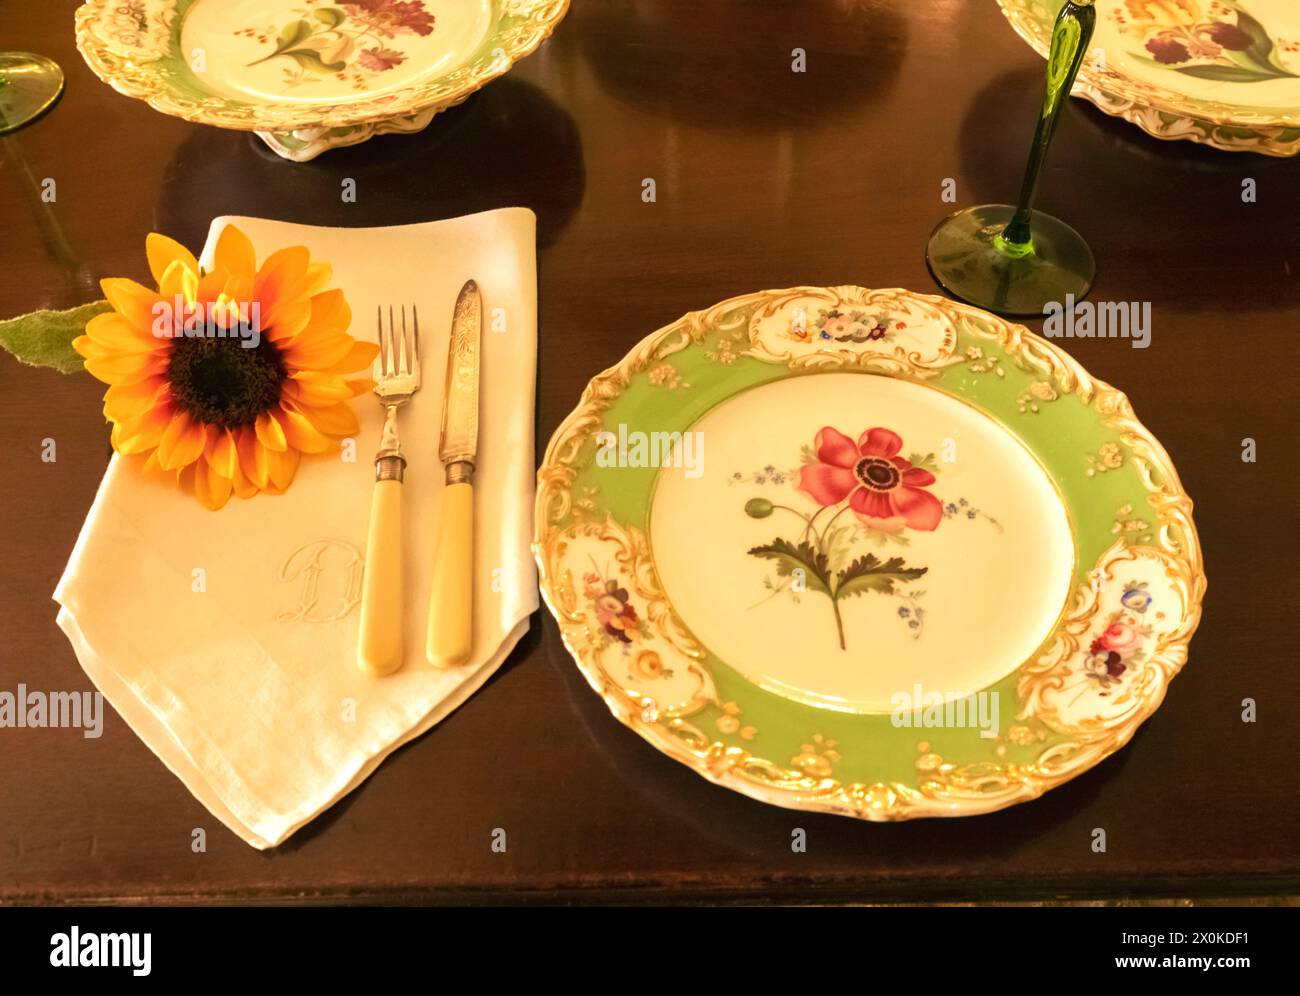 England, Hampshire, Hinton Hampner, Hinton Hampner Country House, The Dining Room, Dining Table Setting Stockfoto